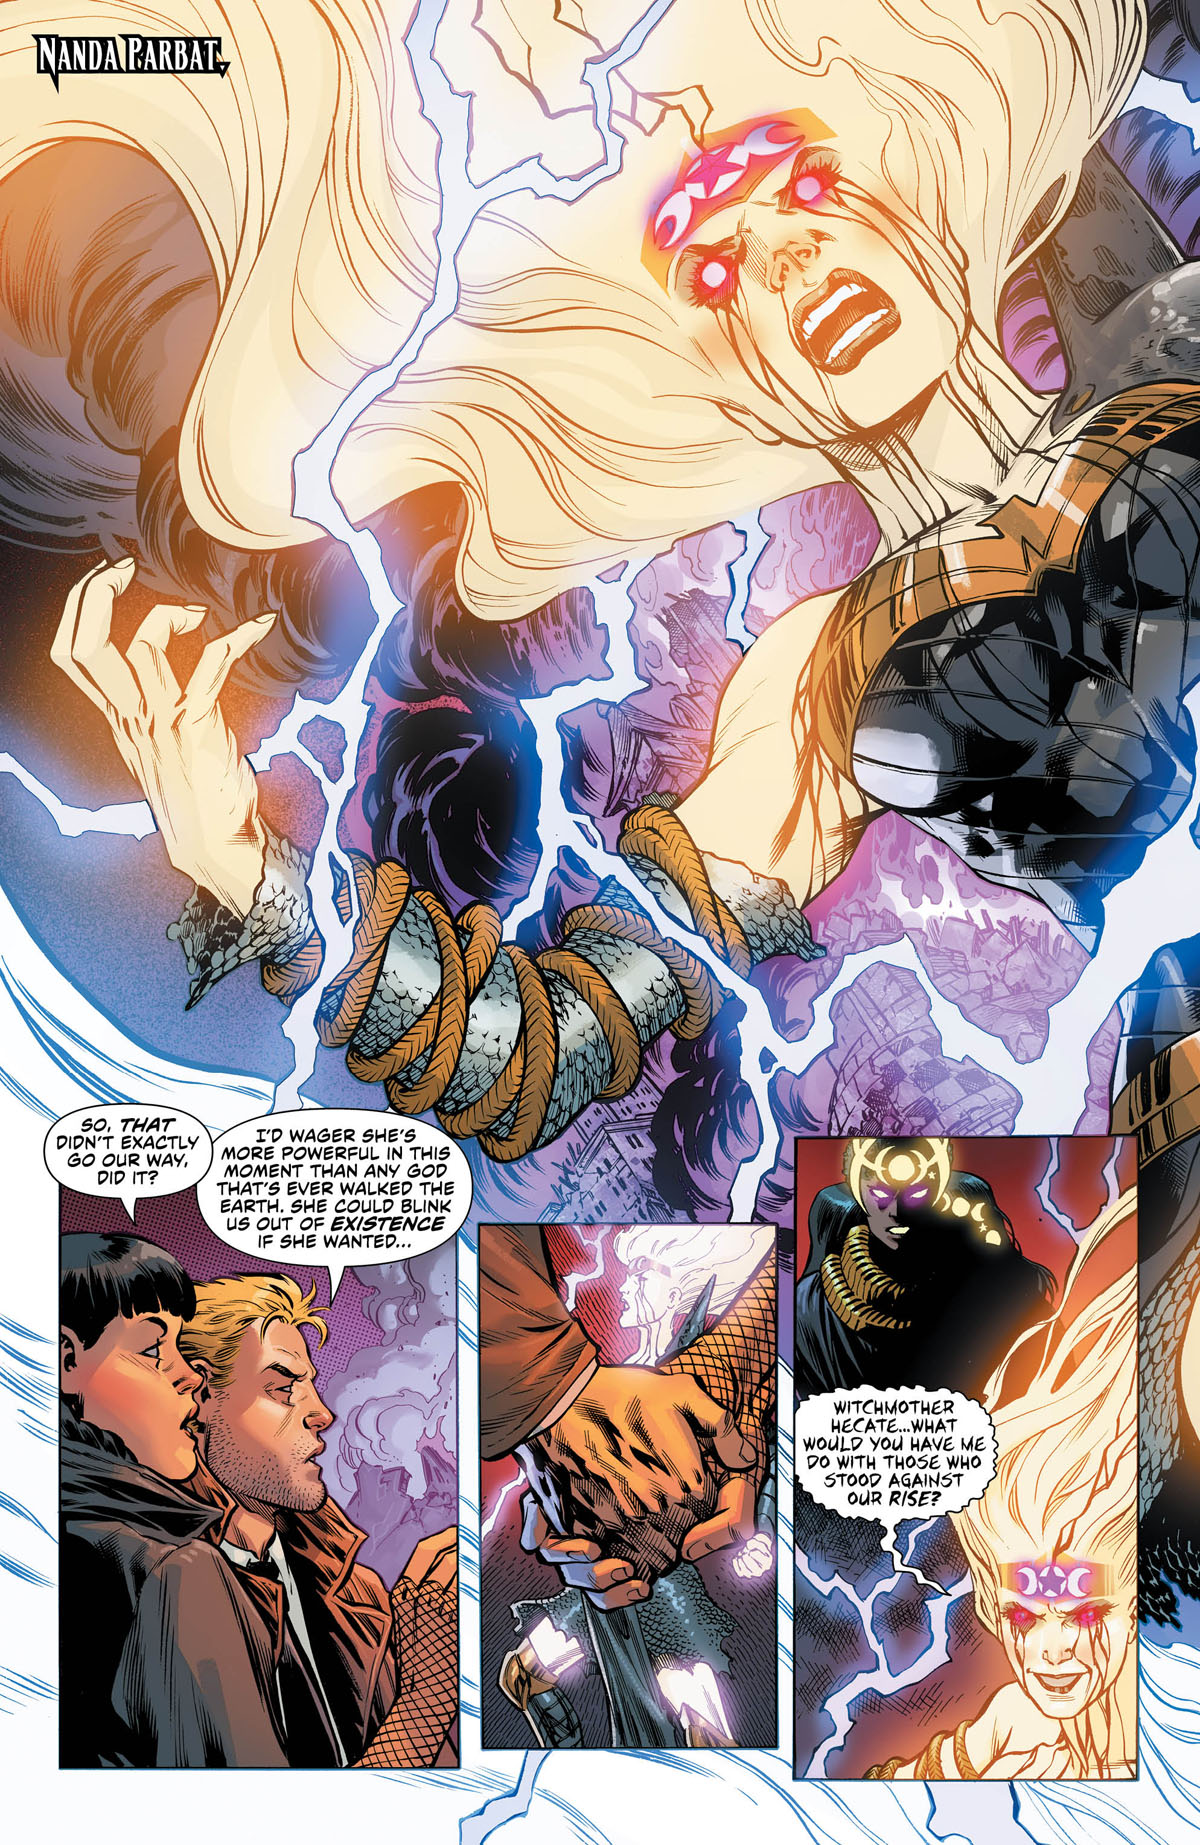 Justice League Dark Wonder Woman: The Witching Hour #1 page 6